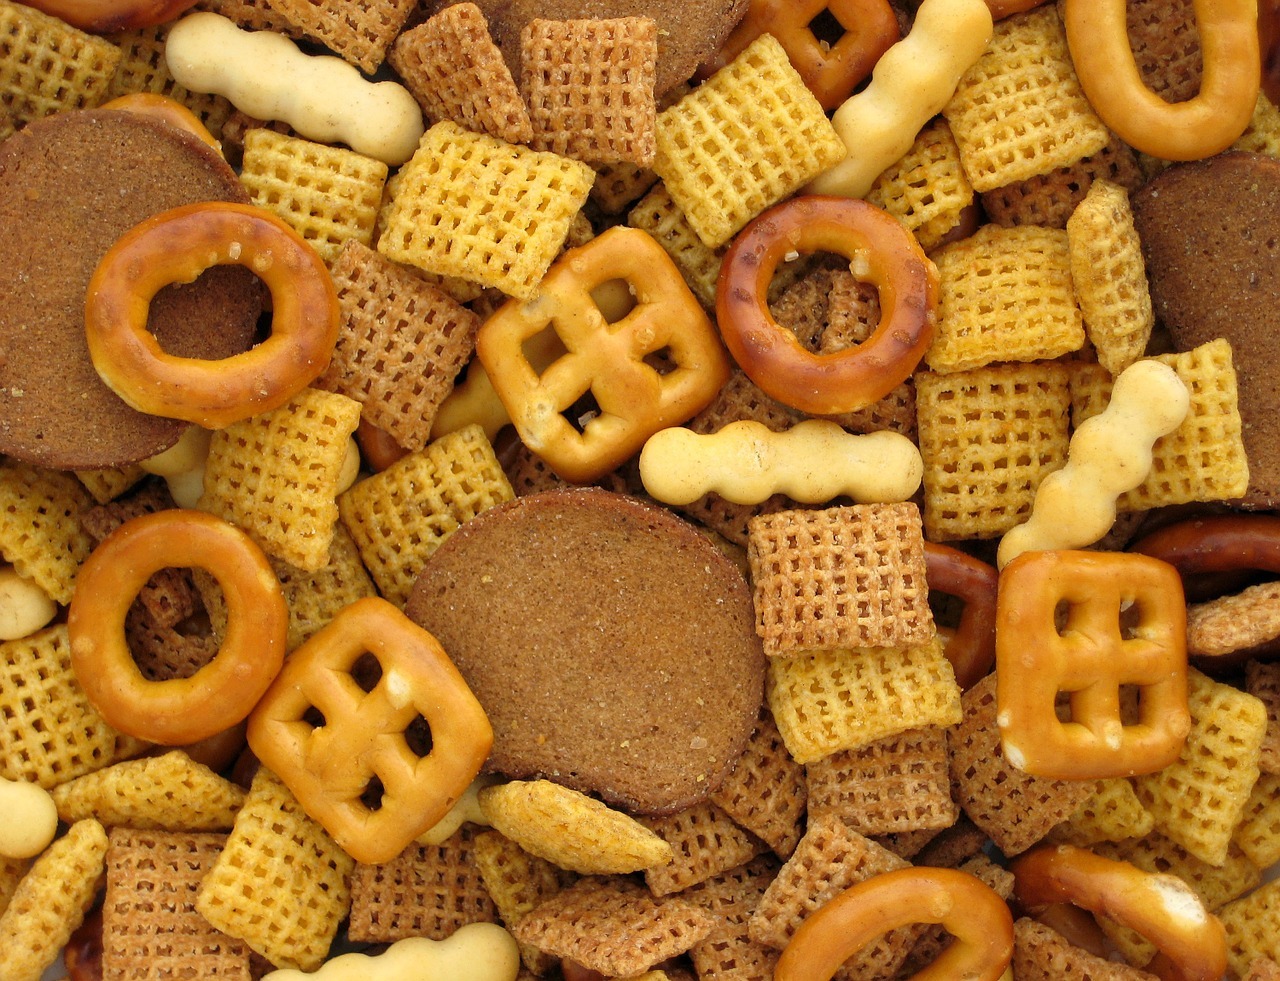 Why People Love Crunchy Snacks